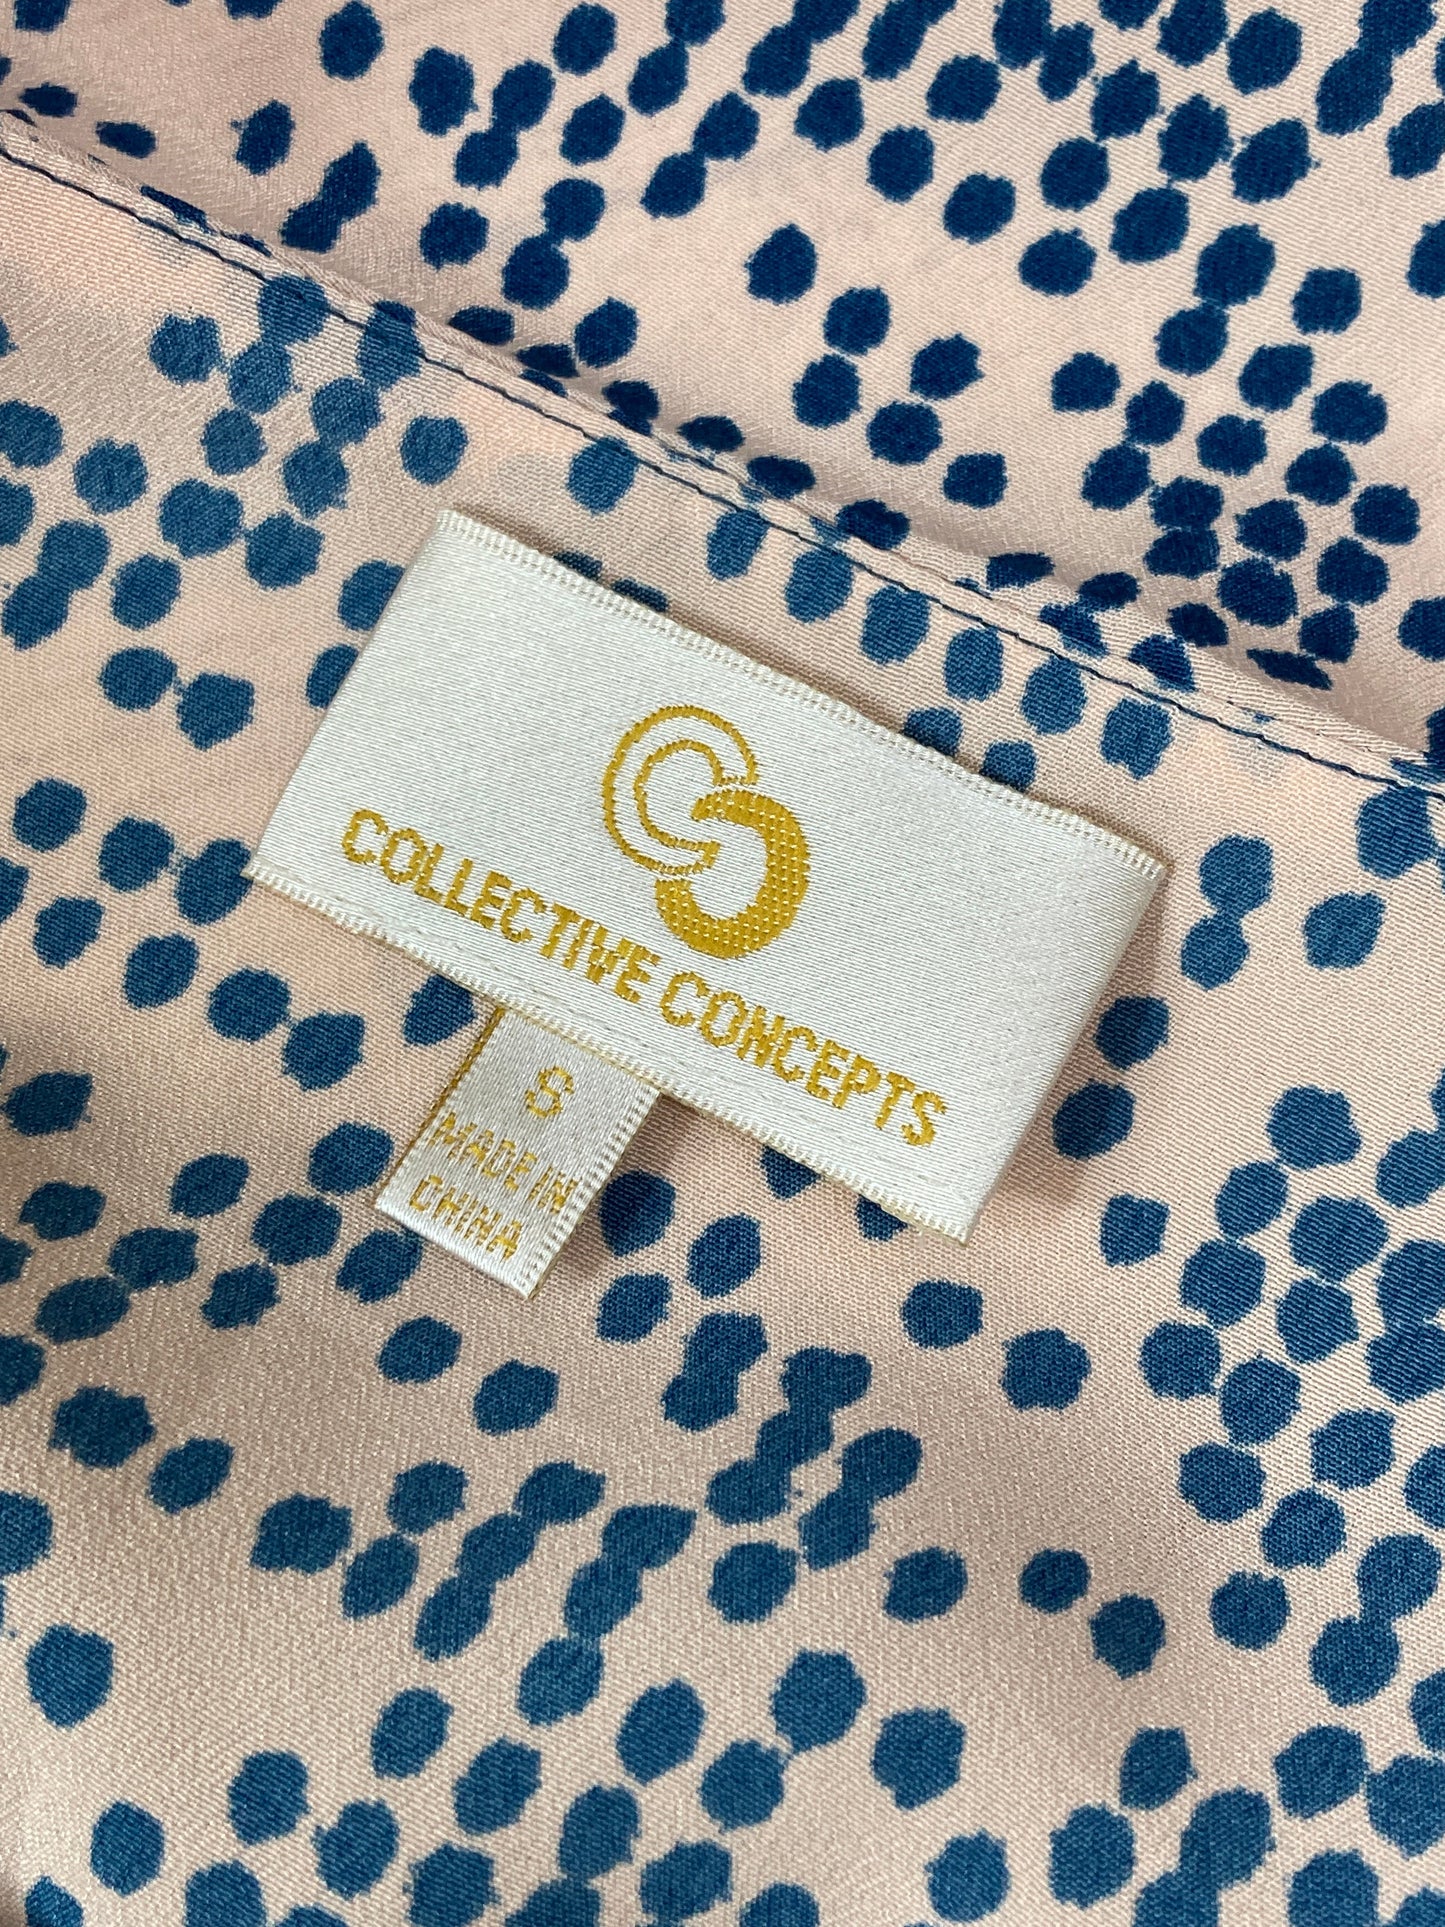 Blouse Sleeveless By Collective Concepts  Size: S